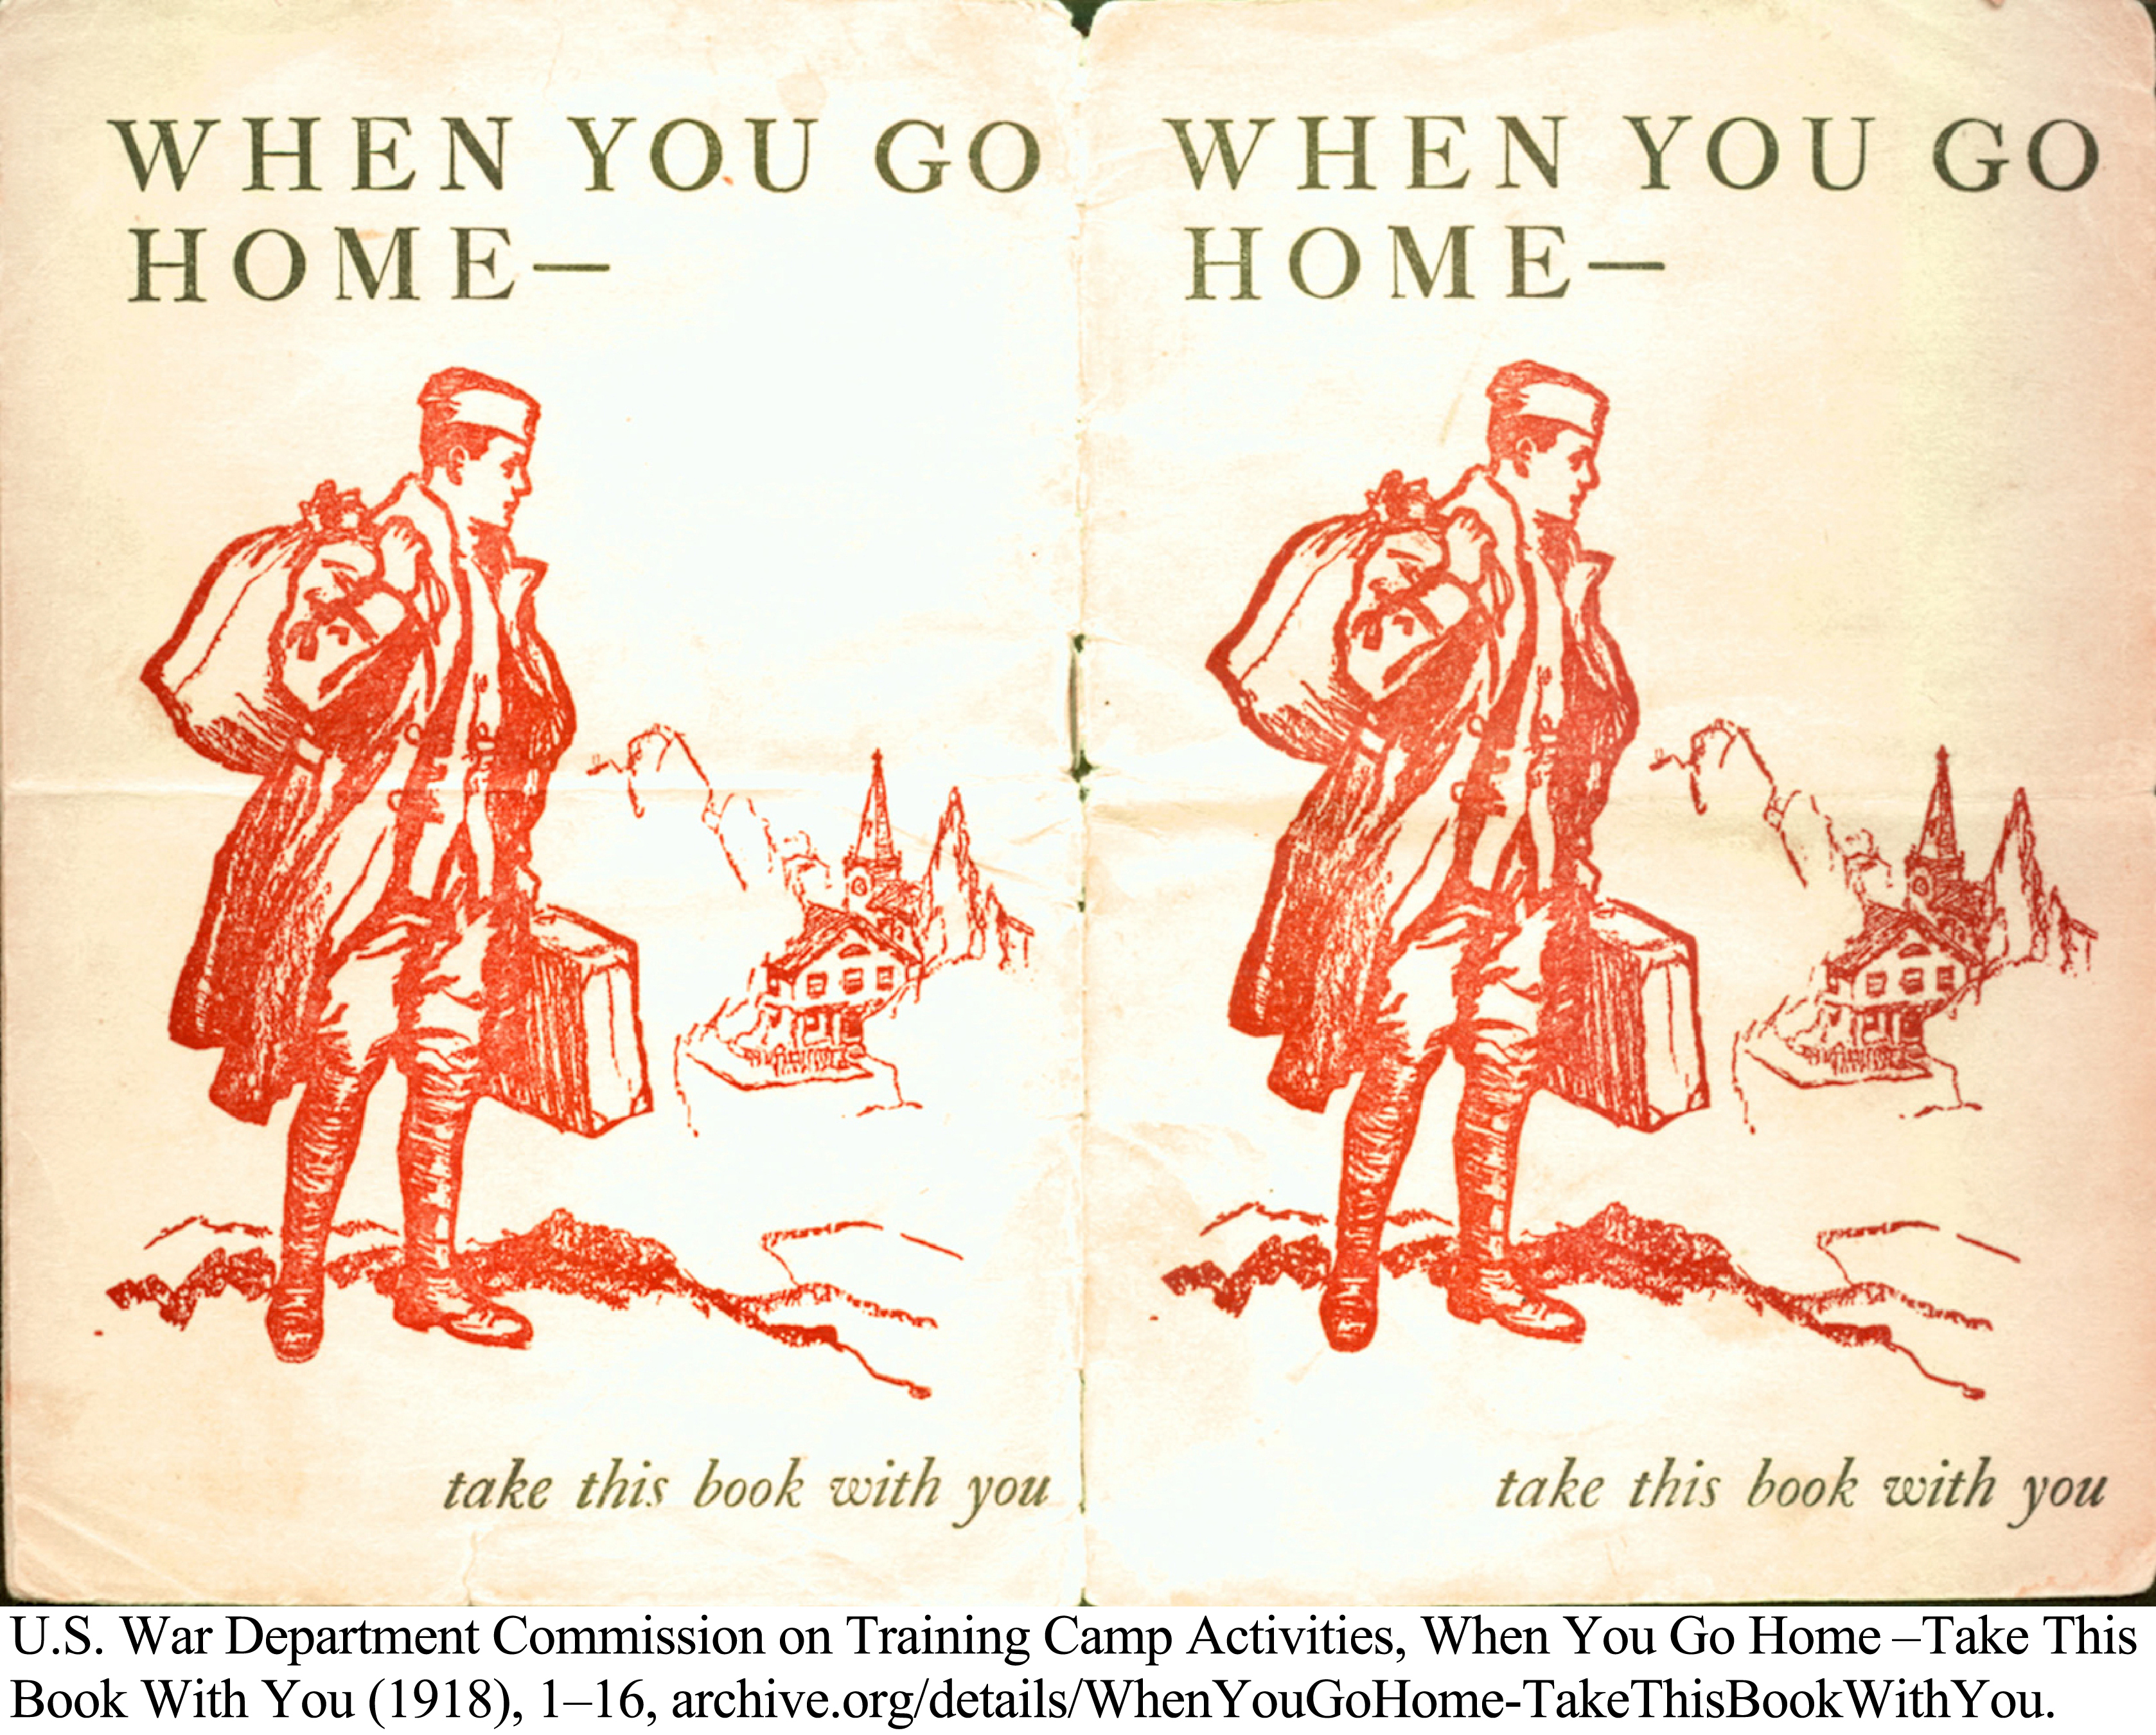 “When You Go Home” pamphlet